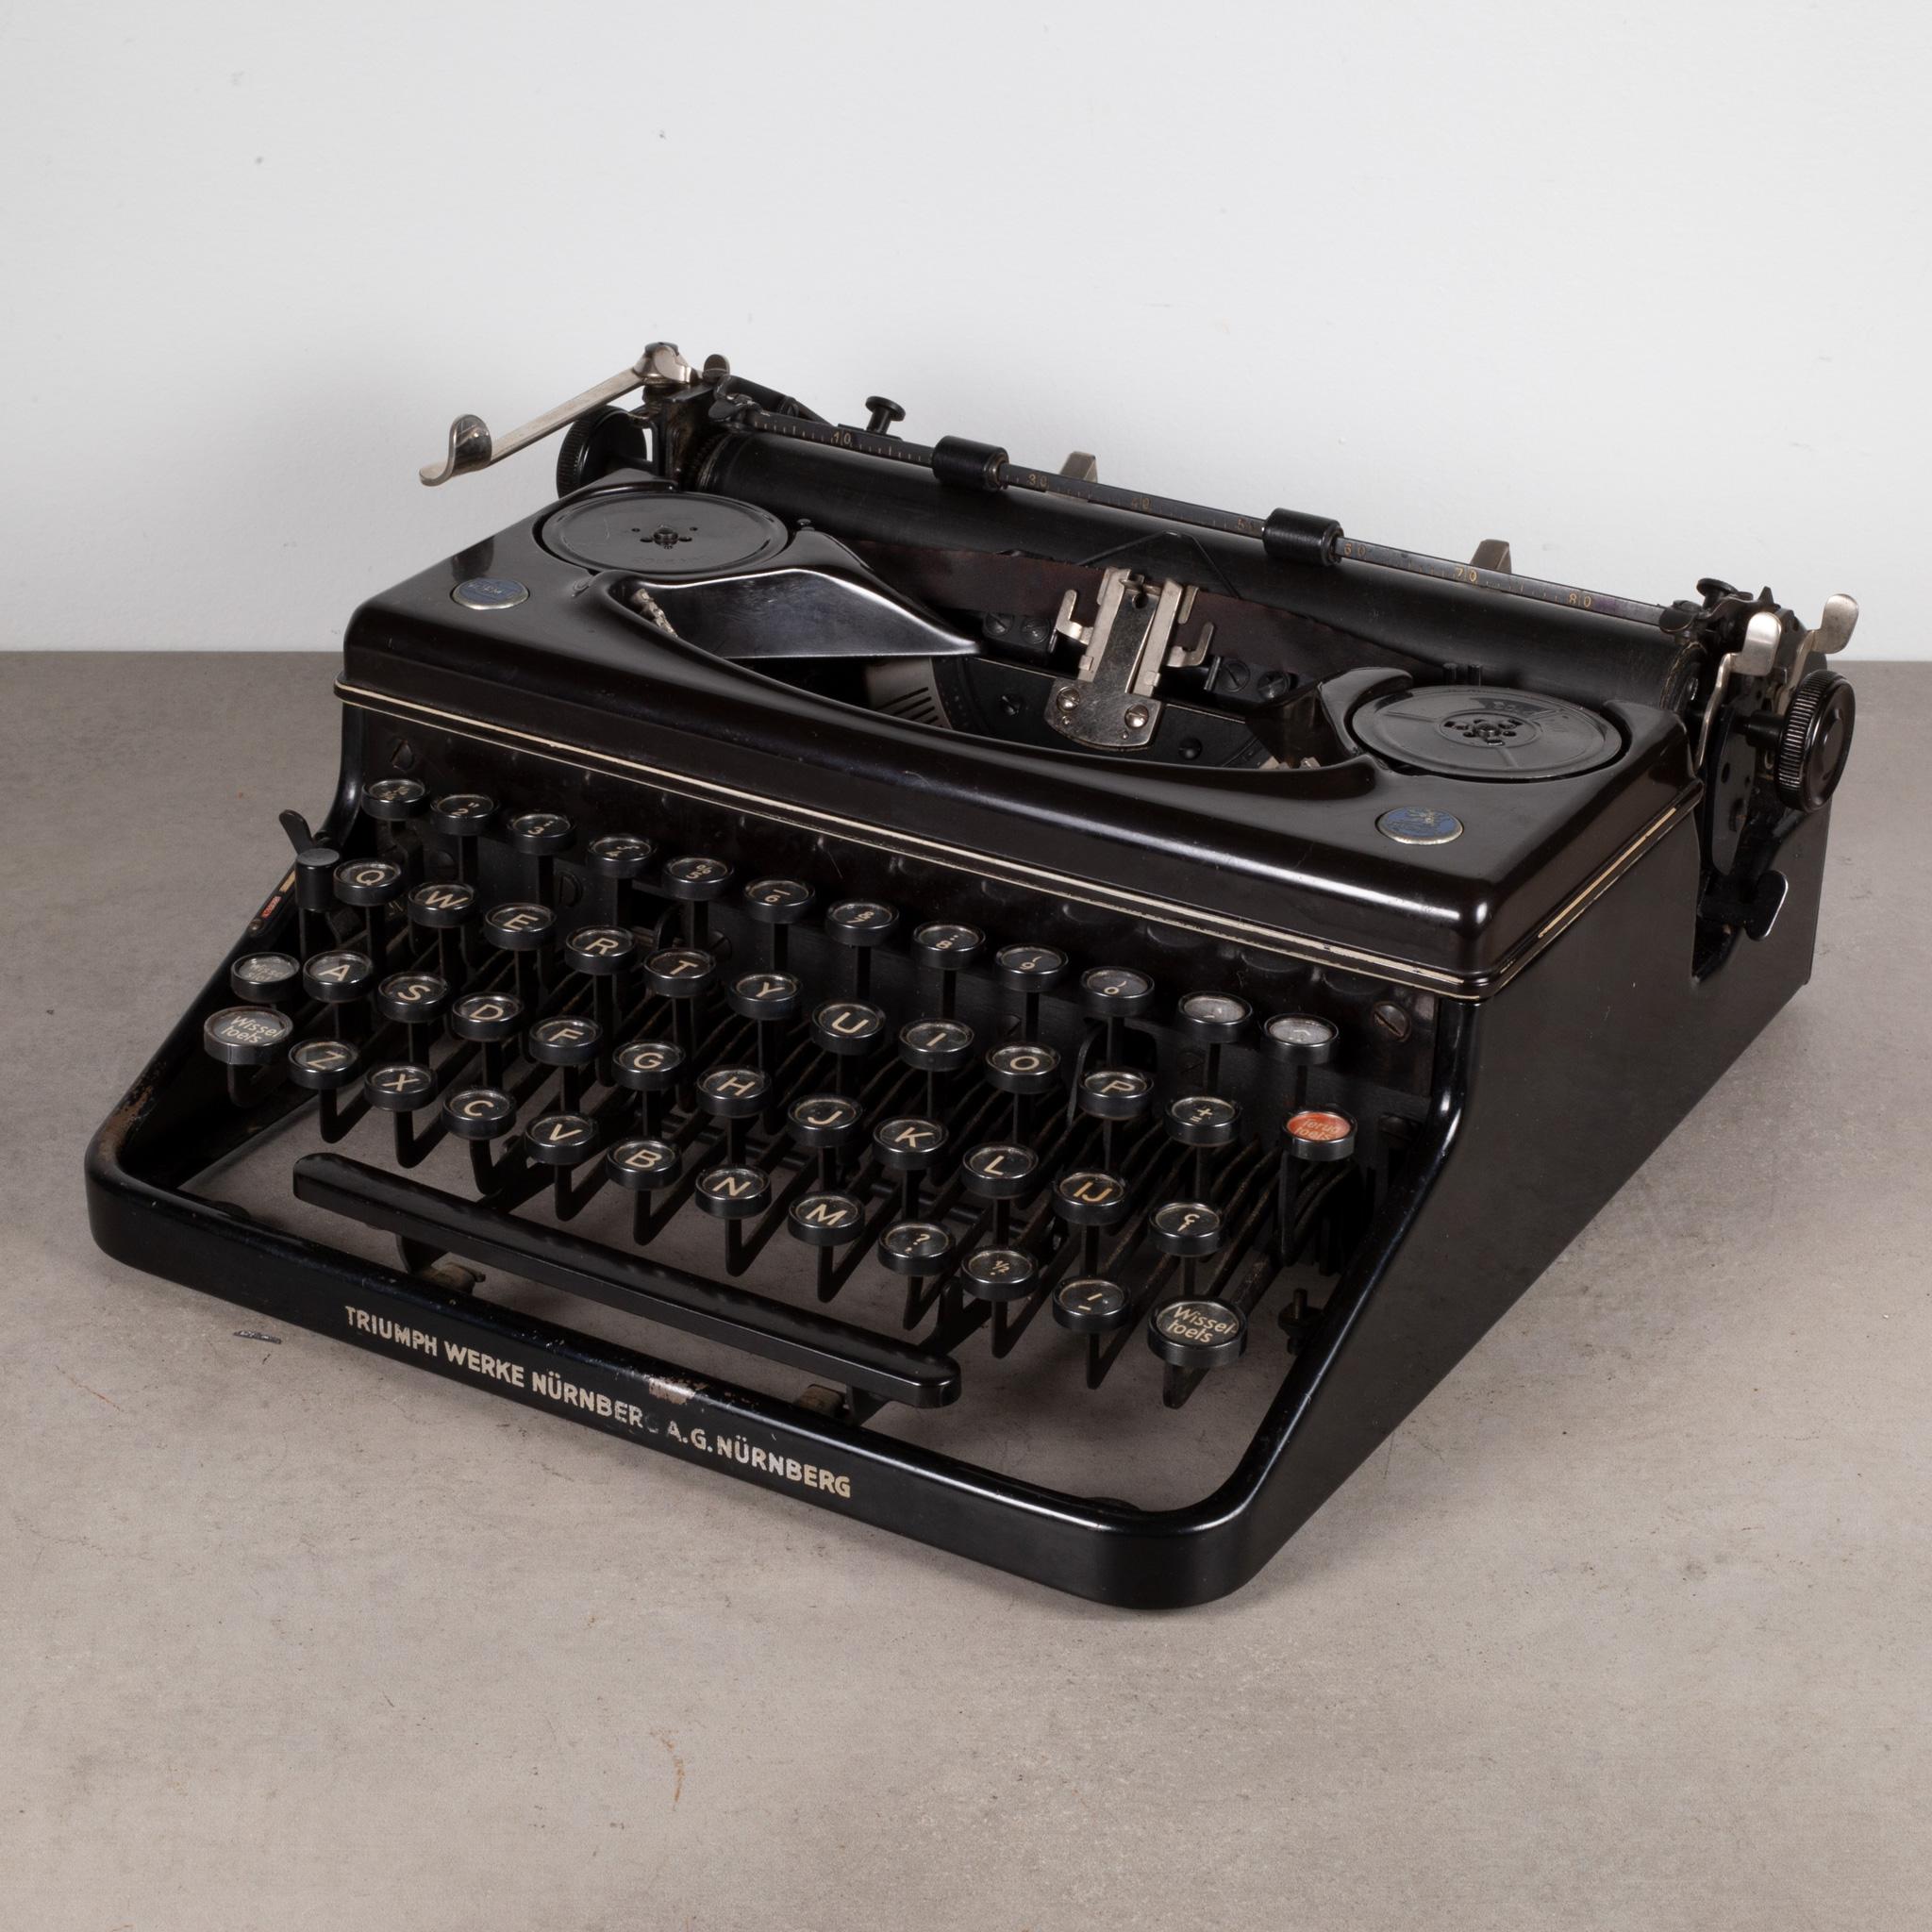 About

An antique Antique East German Triumph Werke A.G. Nurnberg typewriter with German keys. Two medallions on top 